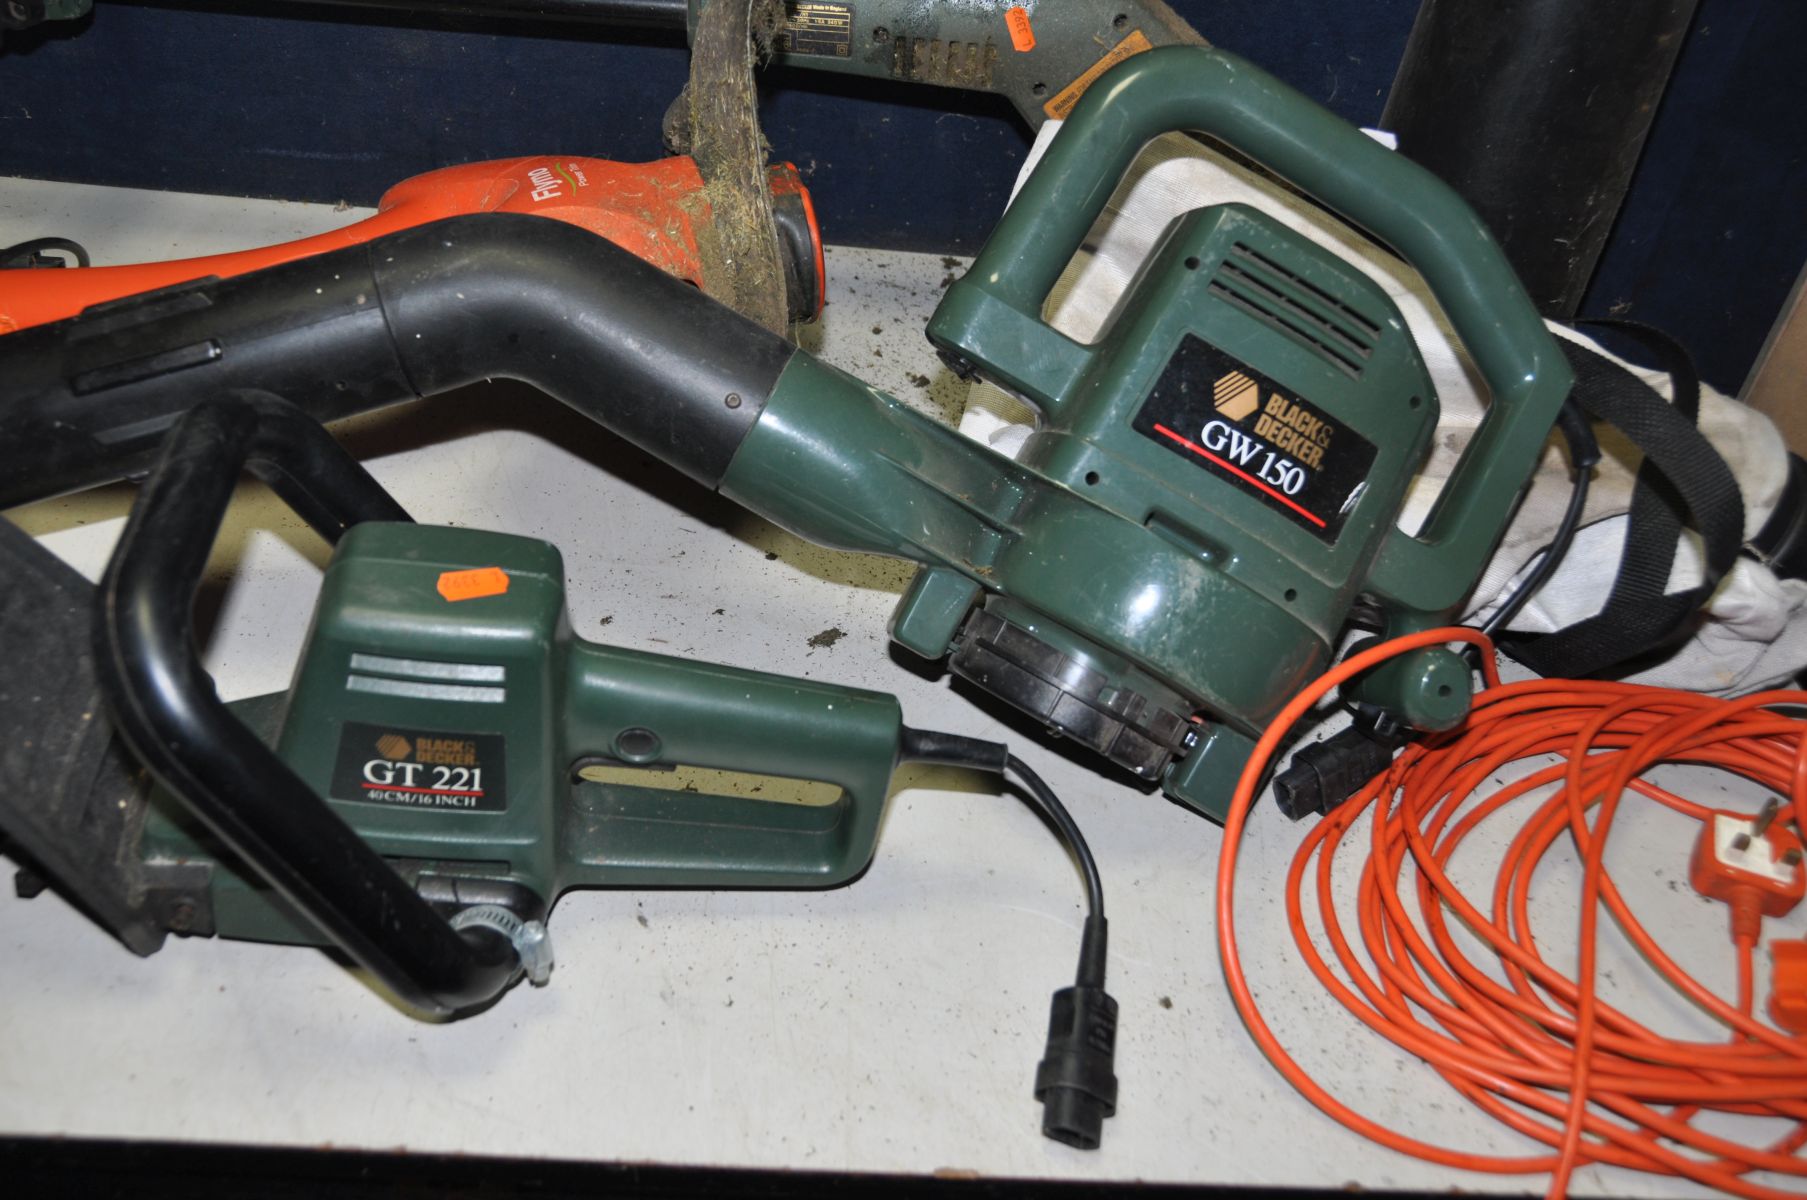 A FLYMO POWER TRIM STRIMMER and three Black and Decker garden tools with one cable comprising a - Image 2 of 3